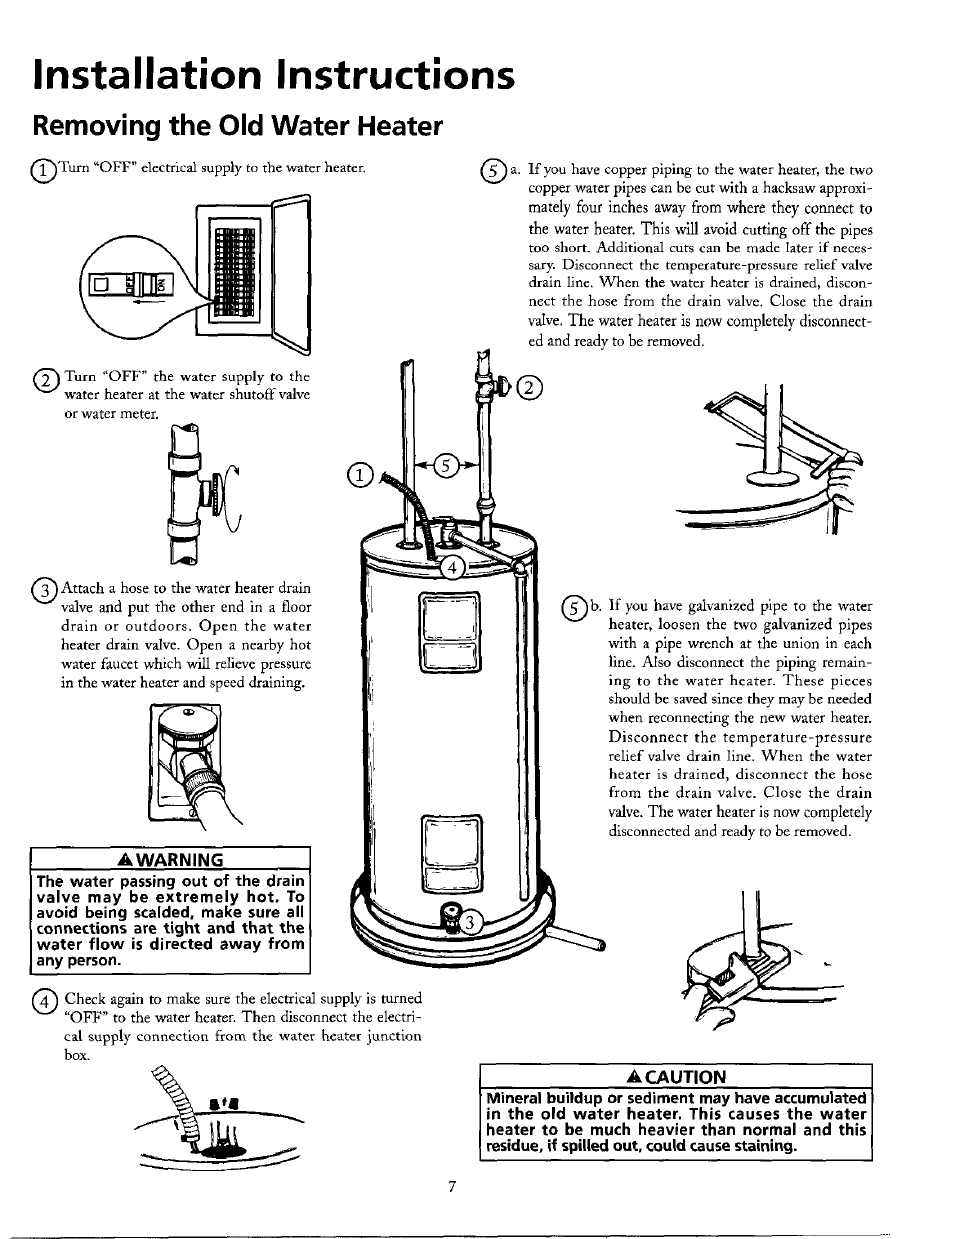 Removing the old water heater, Awarning, A caution | Filling the water heater, Installation instructions | Maytag HE21250PC User Manual | Page 7 / 40